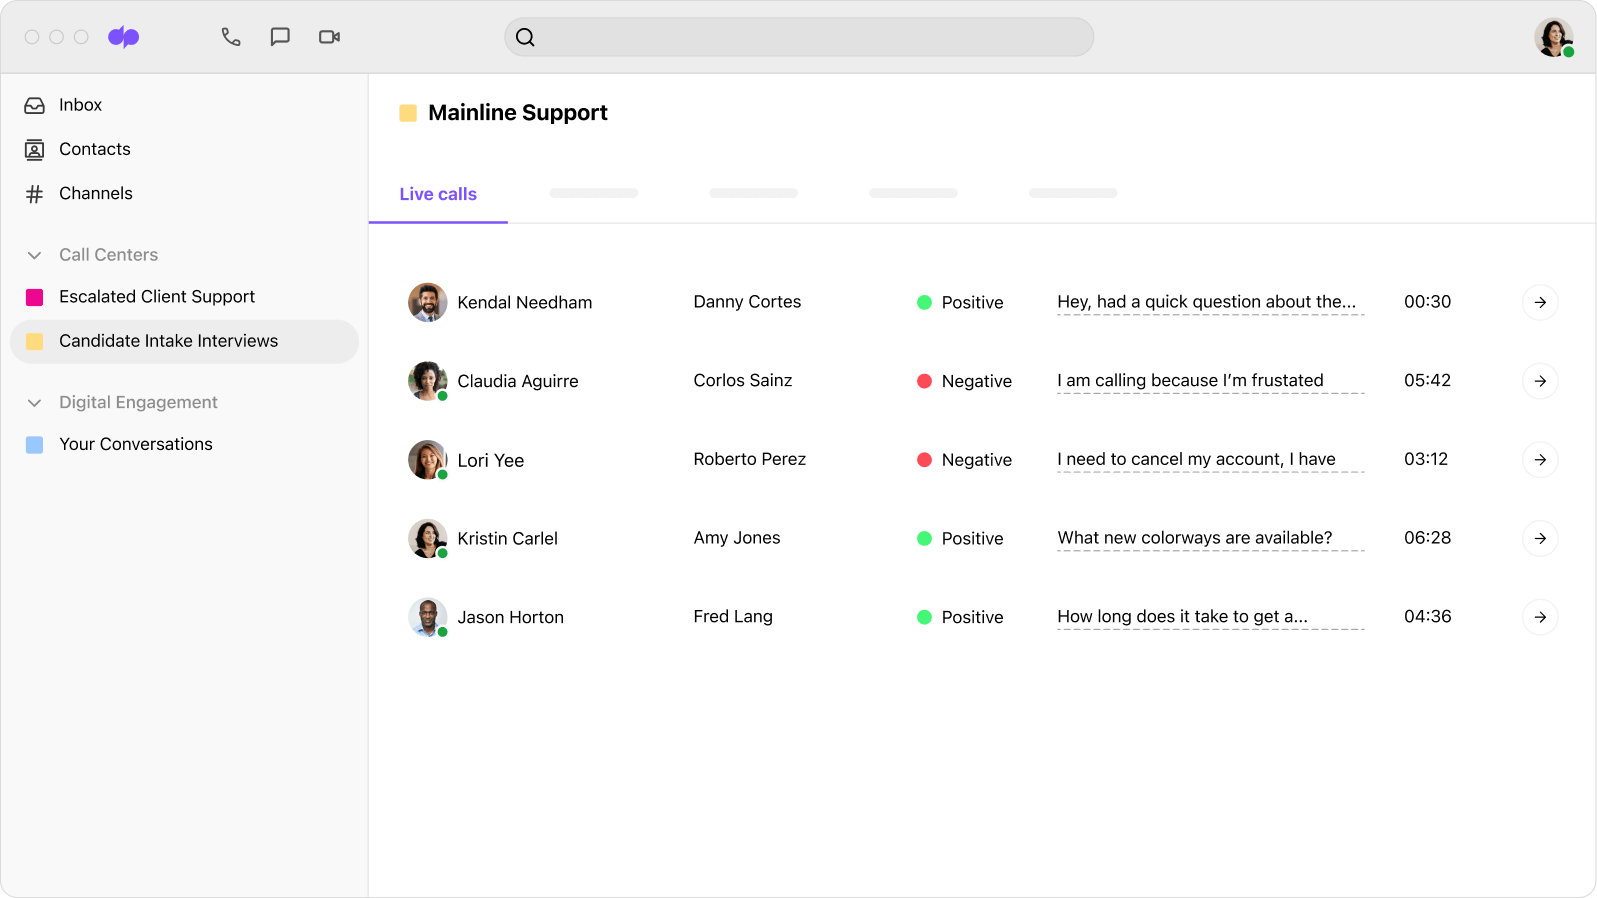 Screenshot of Dialpad Ai analyzing the sentiment of multiple calls in real time